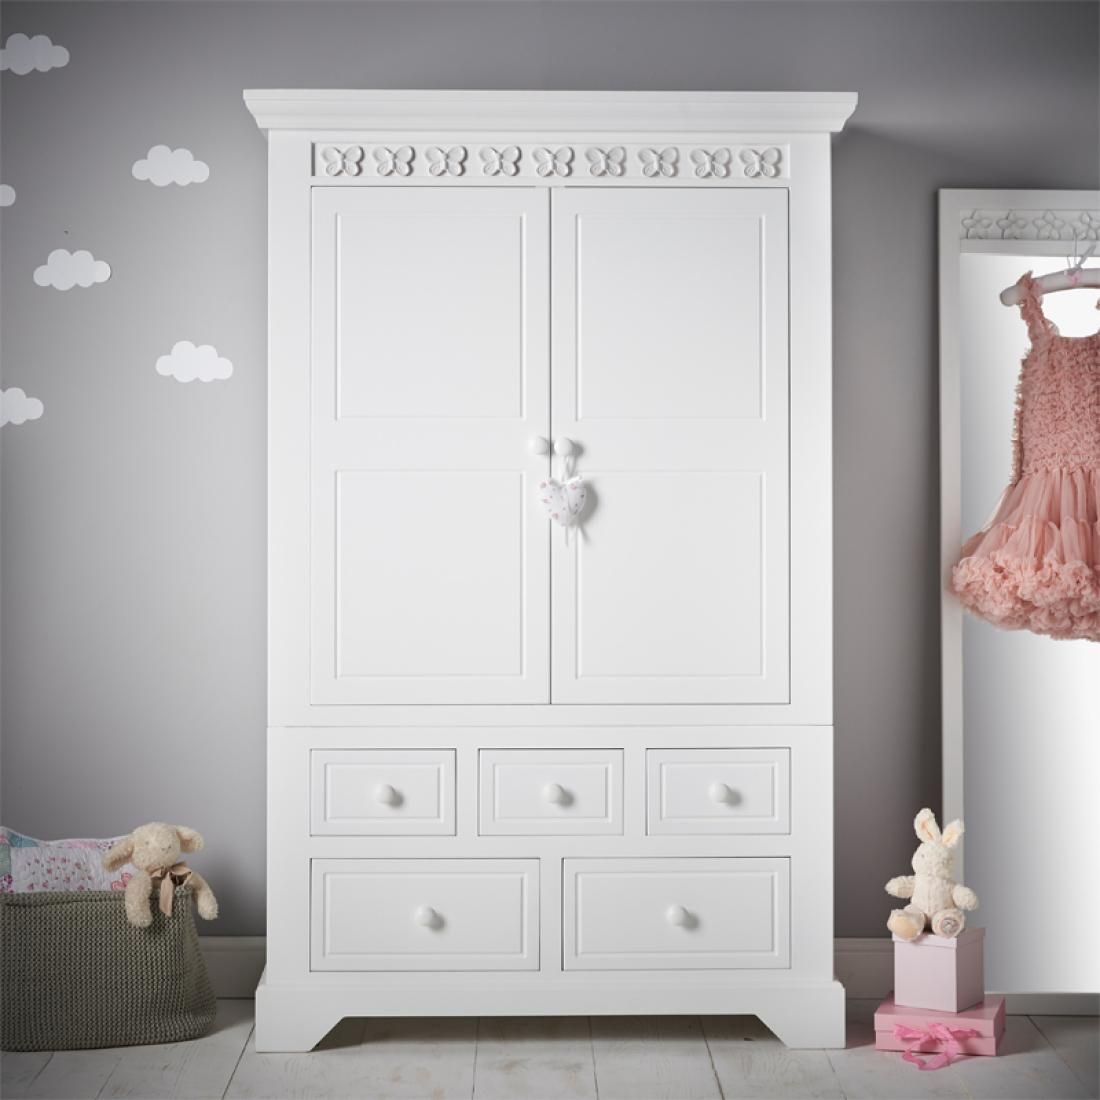 Florence Flutterby Combination Wardrobe | Childrens Wardrobe | Kids Wardrobe Inside Wardrobes And Drawers Combo (View 12 of 15)